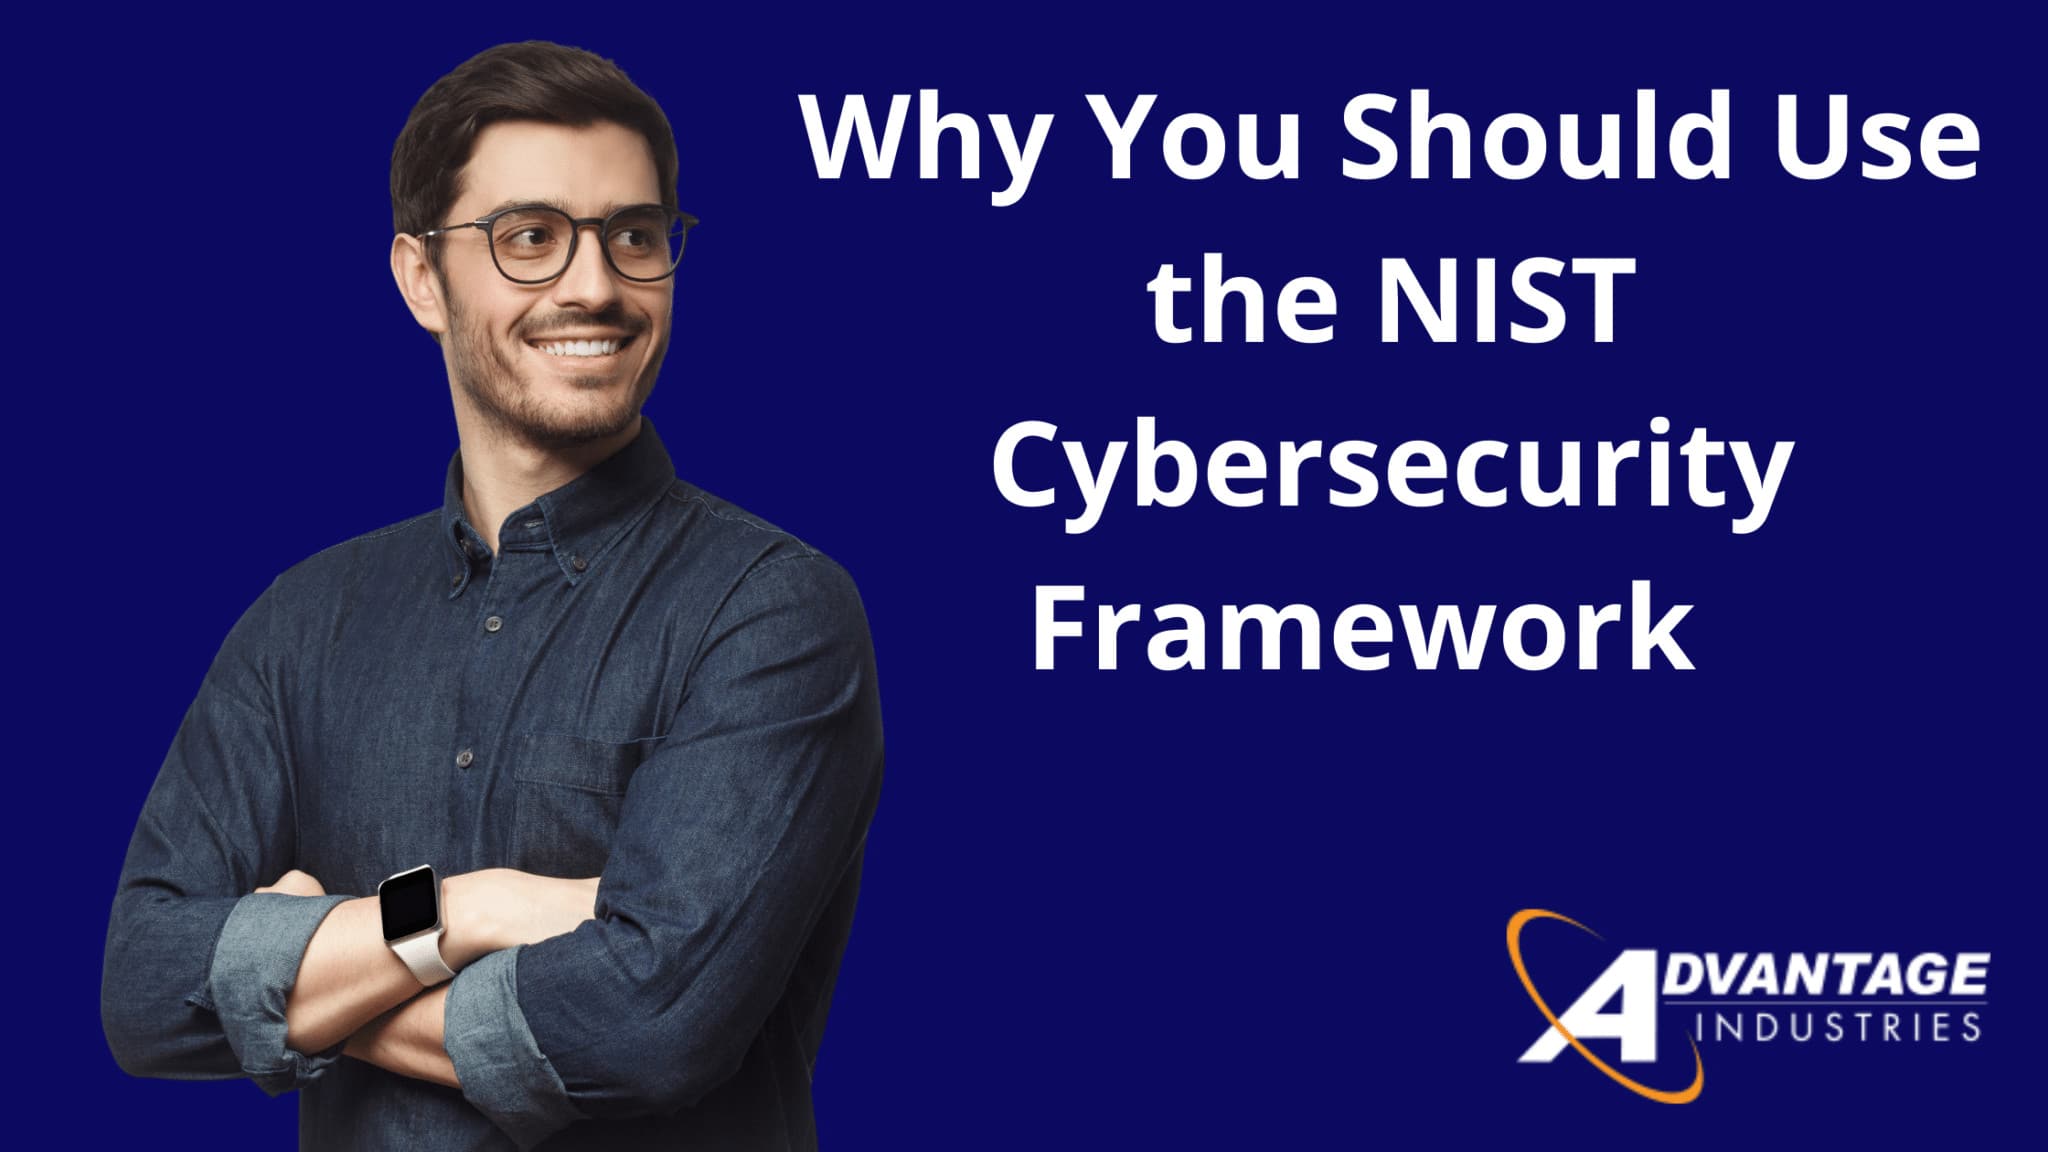 Why You Should Use the NIST Cybersecurity Framework